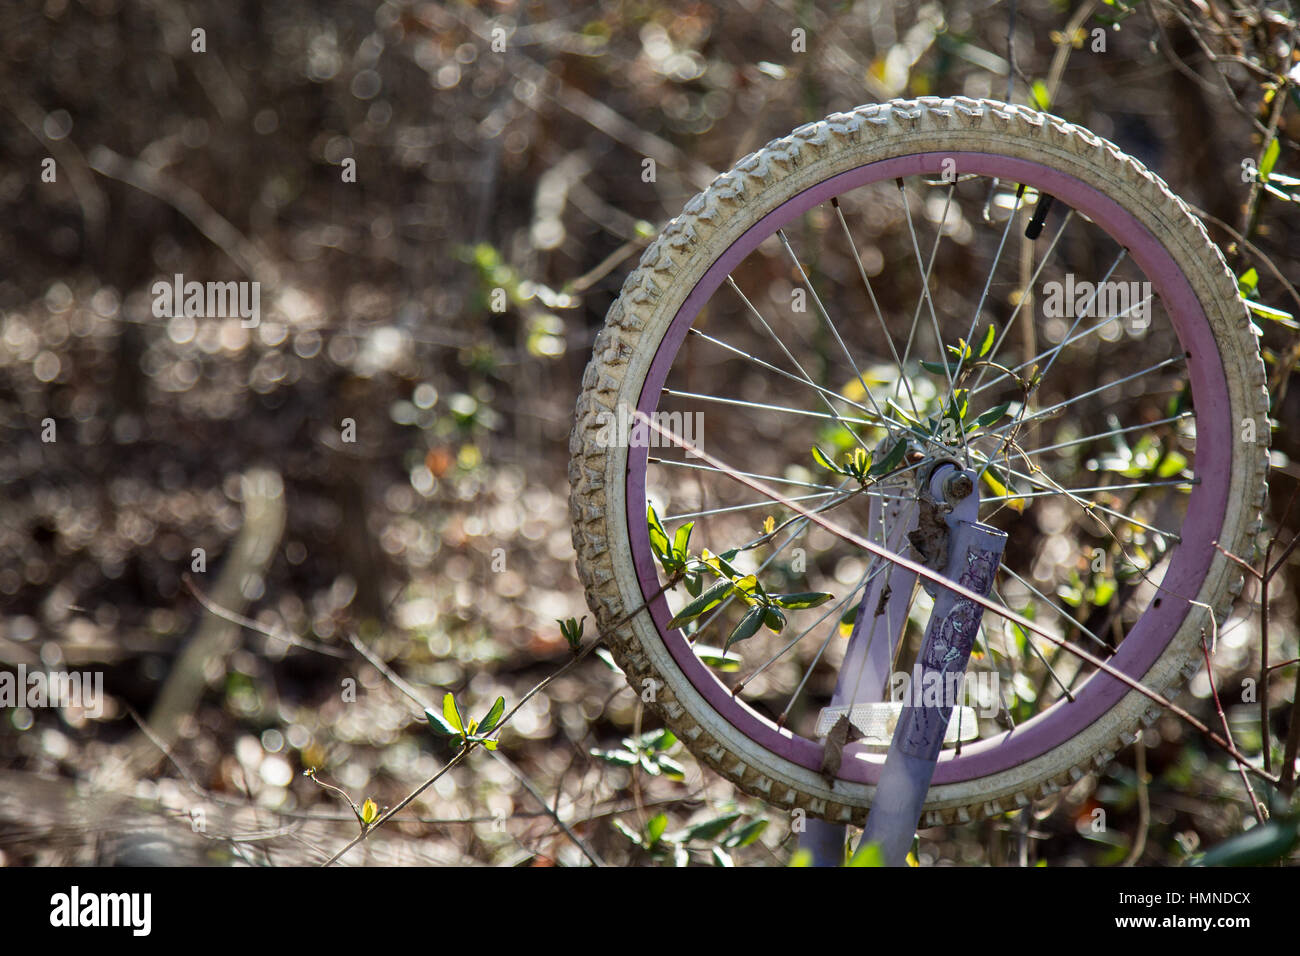 Vines take over a used bicycle that was abandoned in the woods. Stock Photo